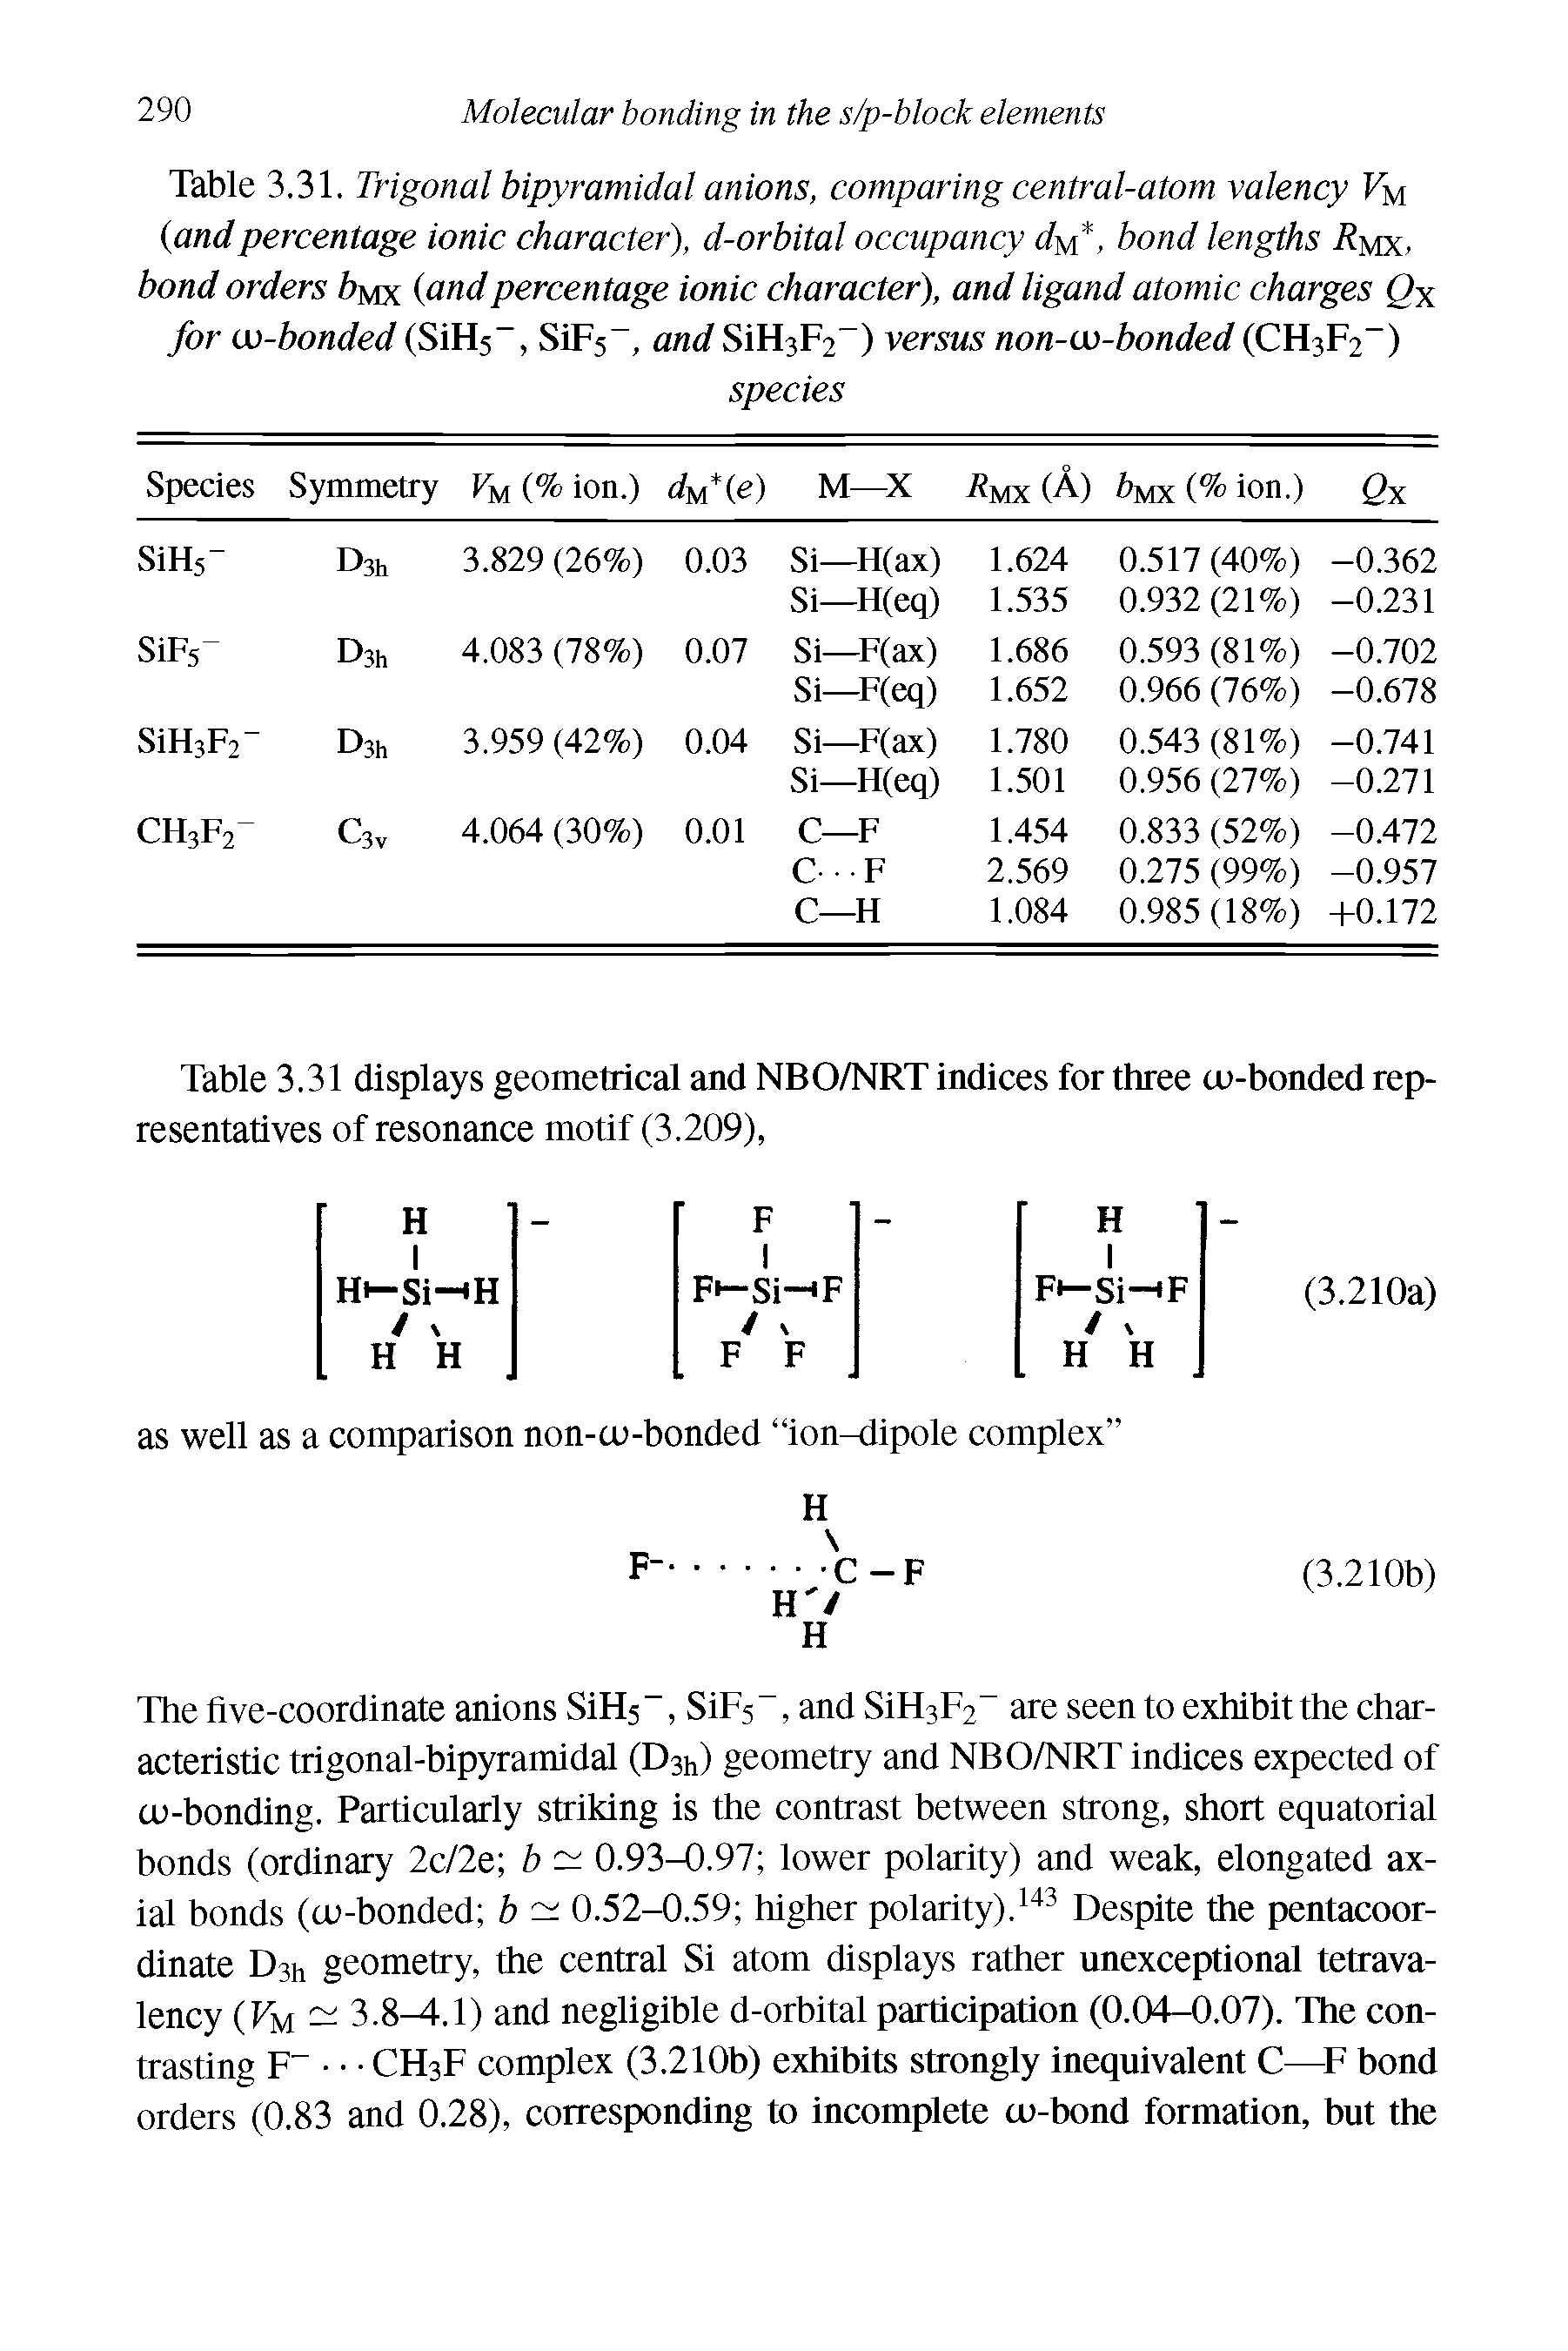 Table 3.31. Trigonal bipyramidal anions, comparing central-atom valency Vm (and percentage ionic character), d-orbital occupancy du, bond lengths Rmx, bond orders />mx (andpercentage ionic character), and ligand atomic charges Qx for oo-bonded (SiH3 , SiFs-, and SiH3F2 ) versus non-w-bonded (CH3F2-)...